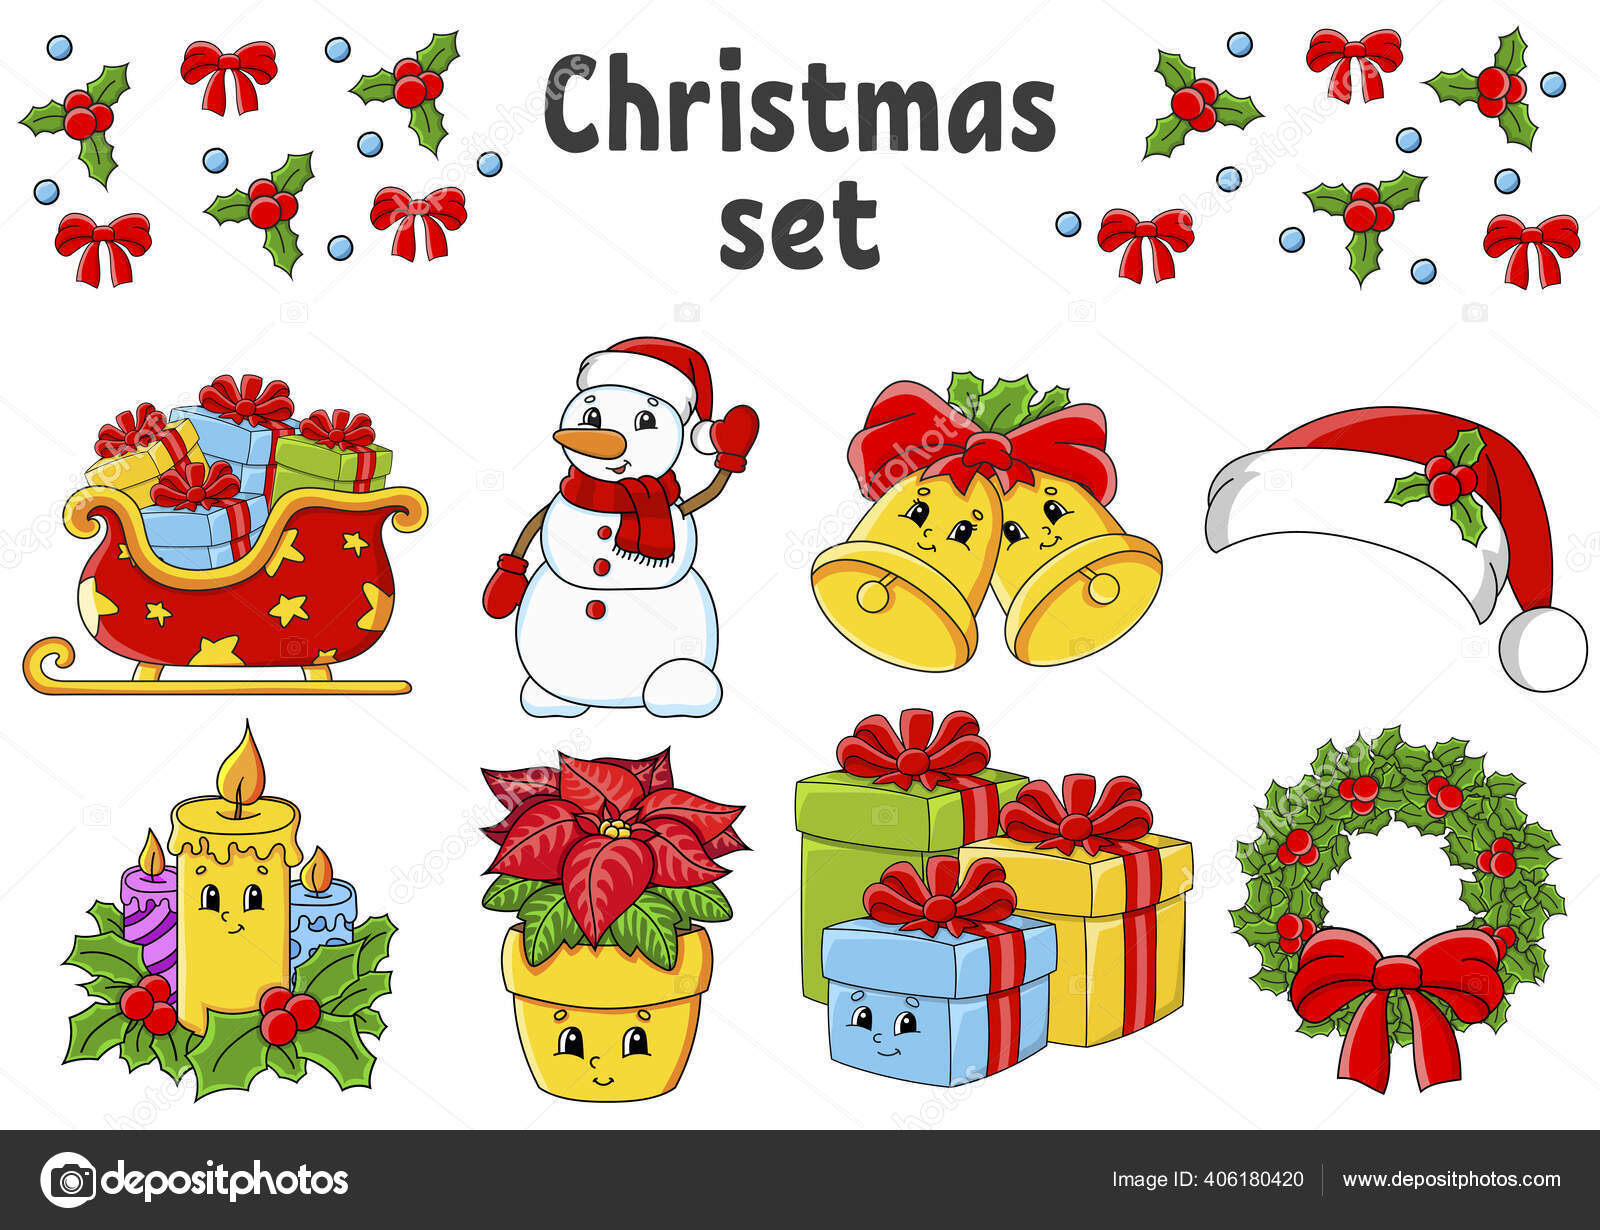 Set Stickers Cute Cartoon Characters Christmas Theme Hand Drawn Colorful Vector Image By C Platypusmi86 Vector Stock 406180420